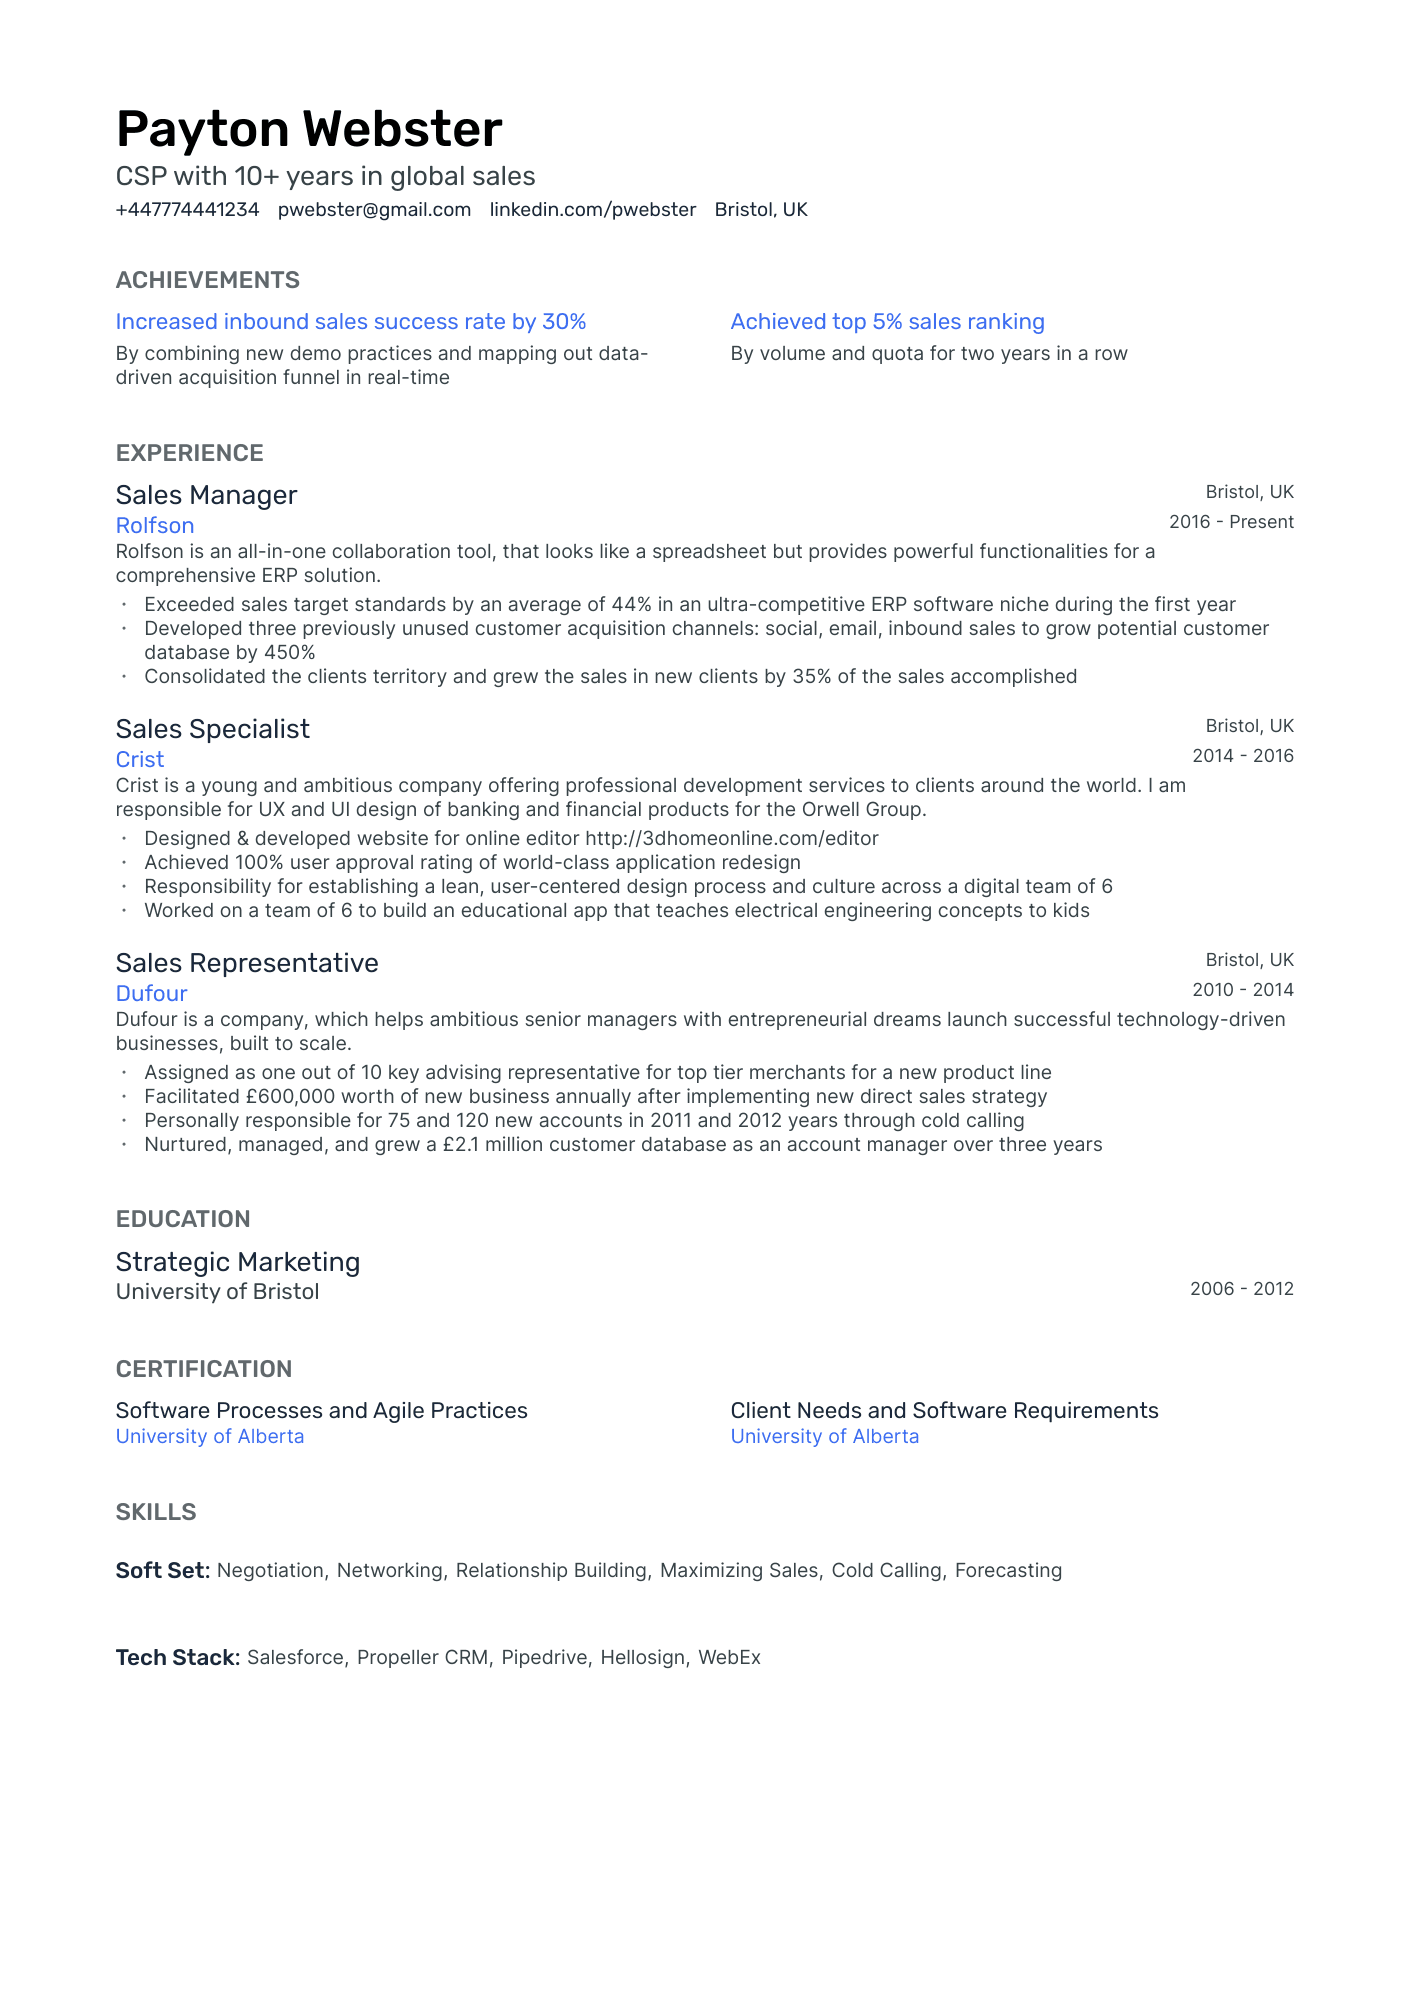 CSP with 10+ years in global sales CV example